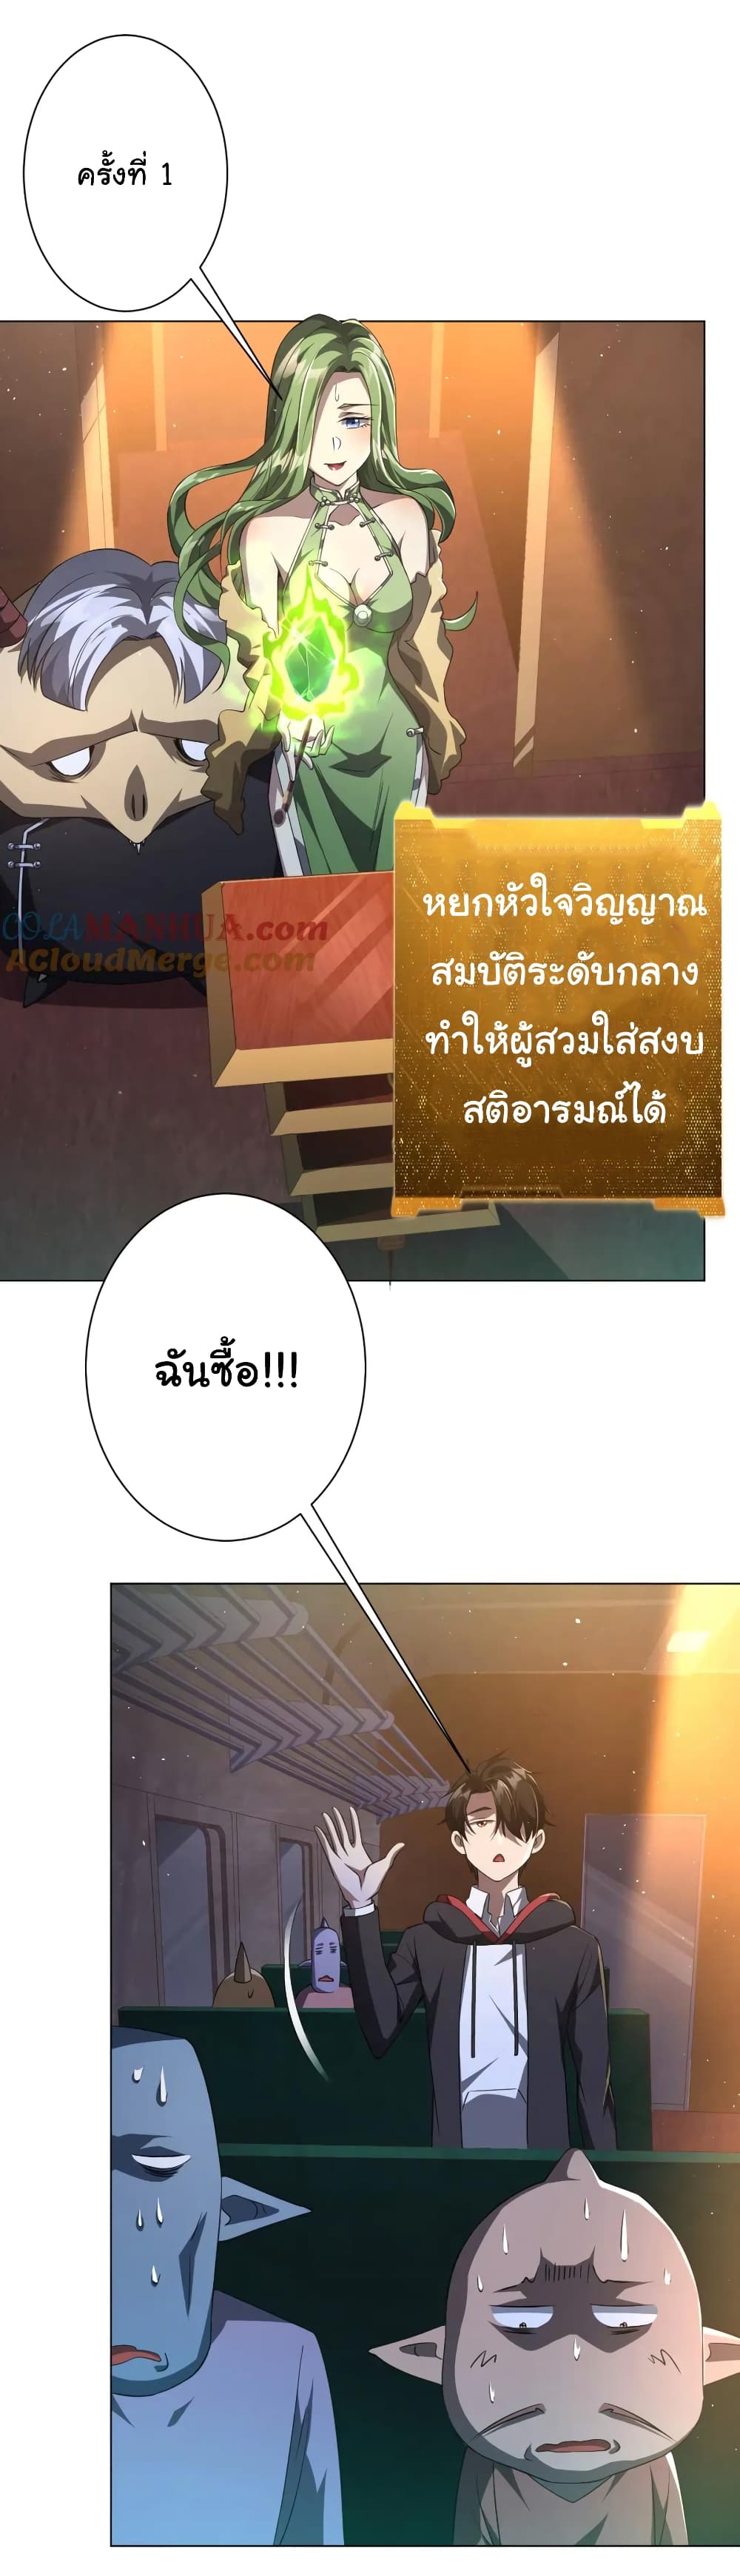 Start with Trillions of Coins ตอนที่ 33 (33)